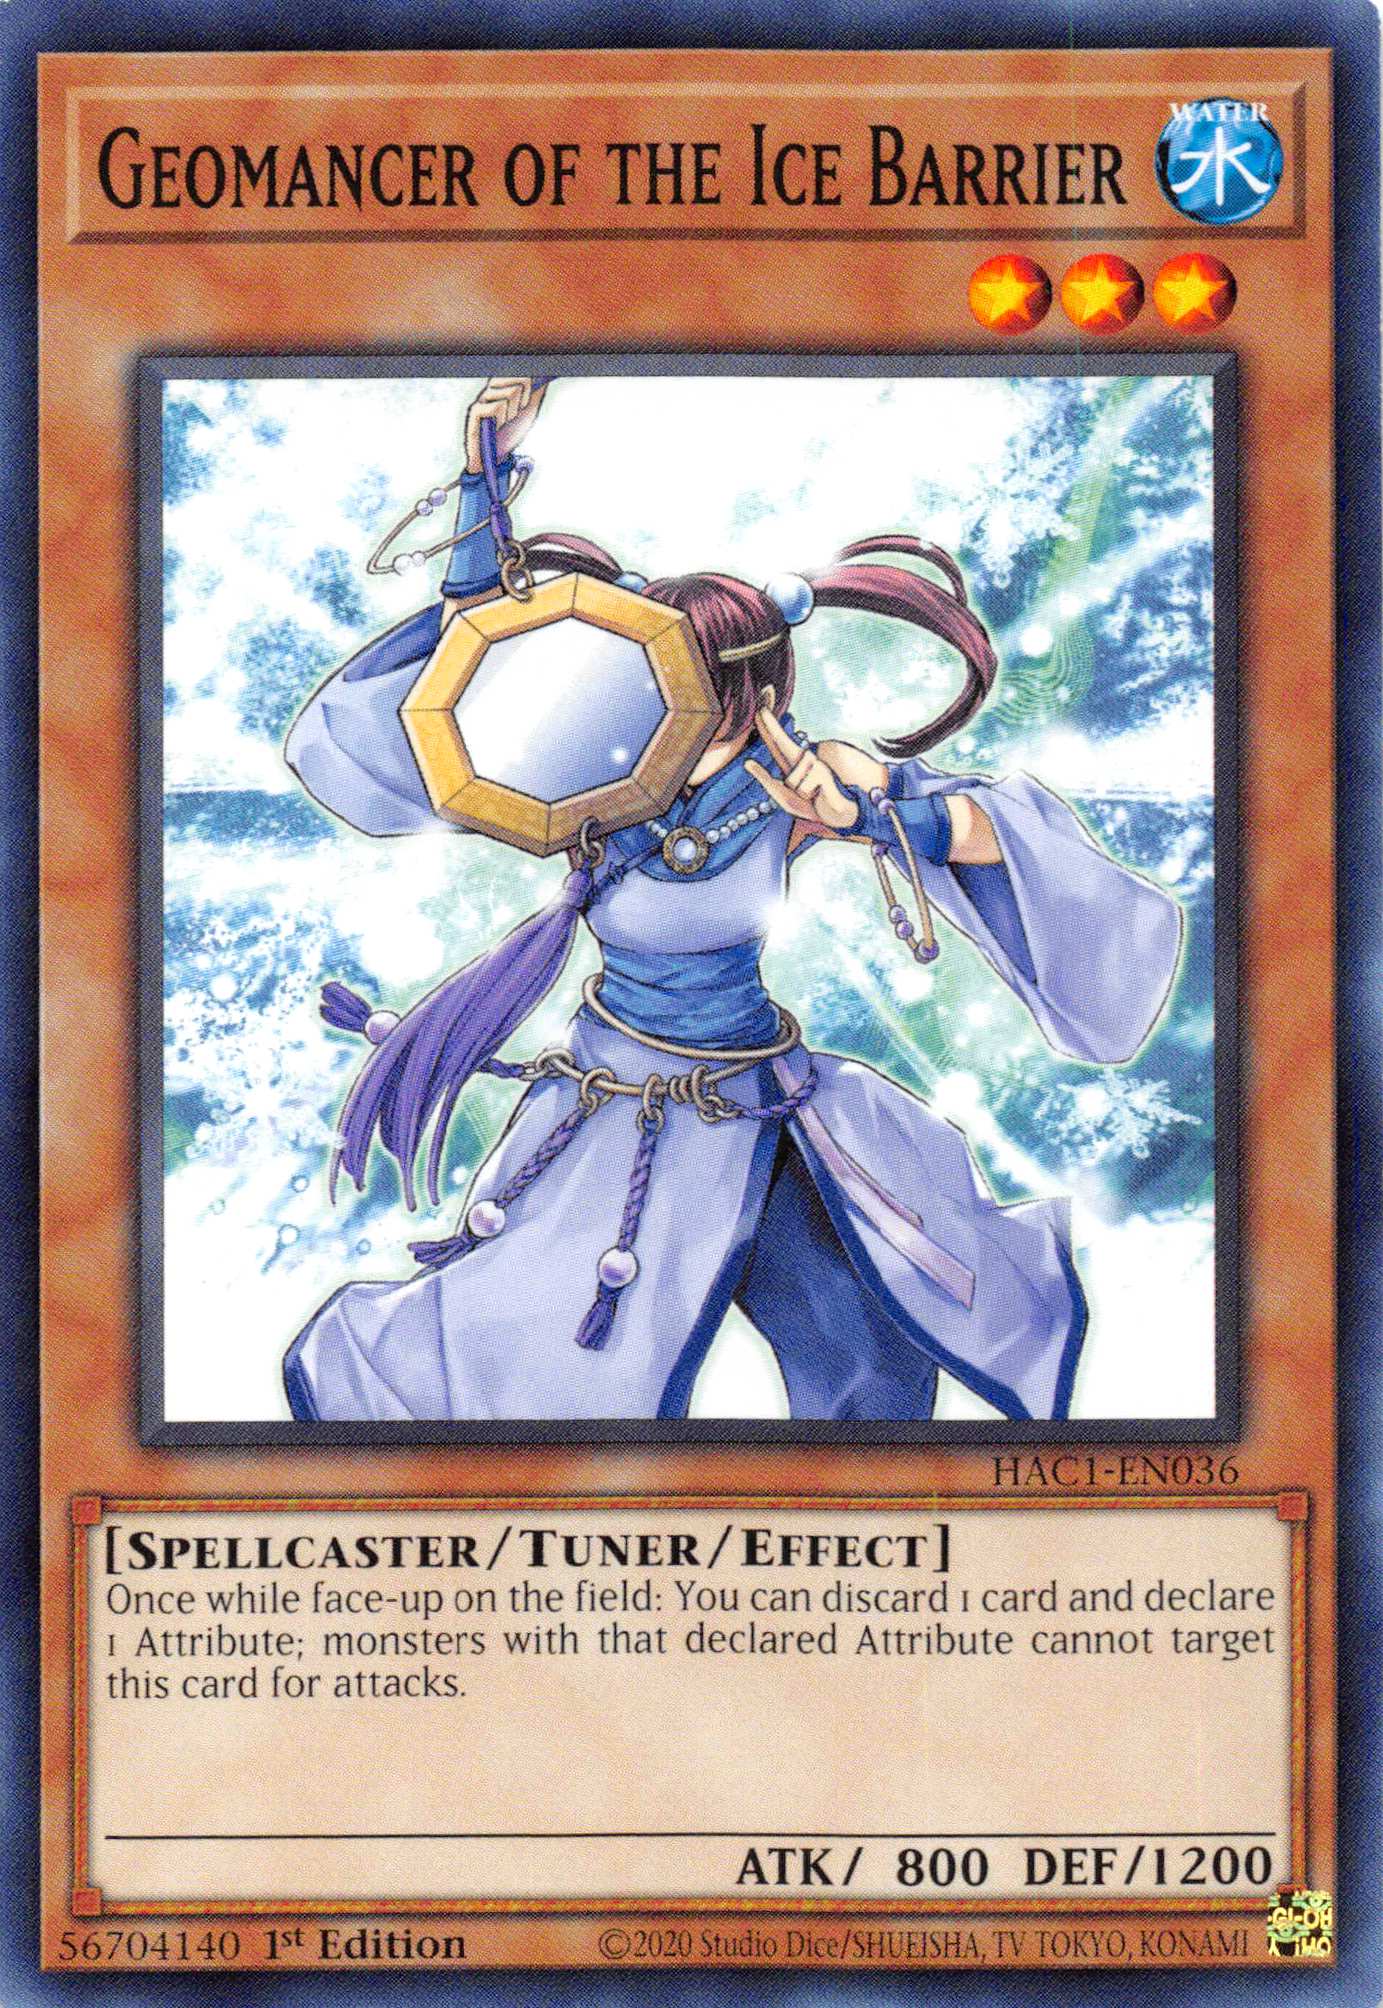 Geomancer of the Ice Barrier [HAC1-EN036] Common - Duel Kingdom